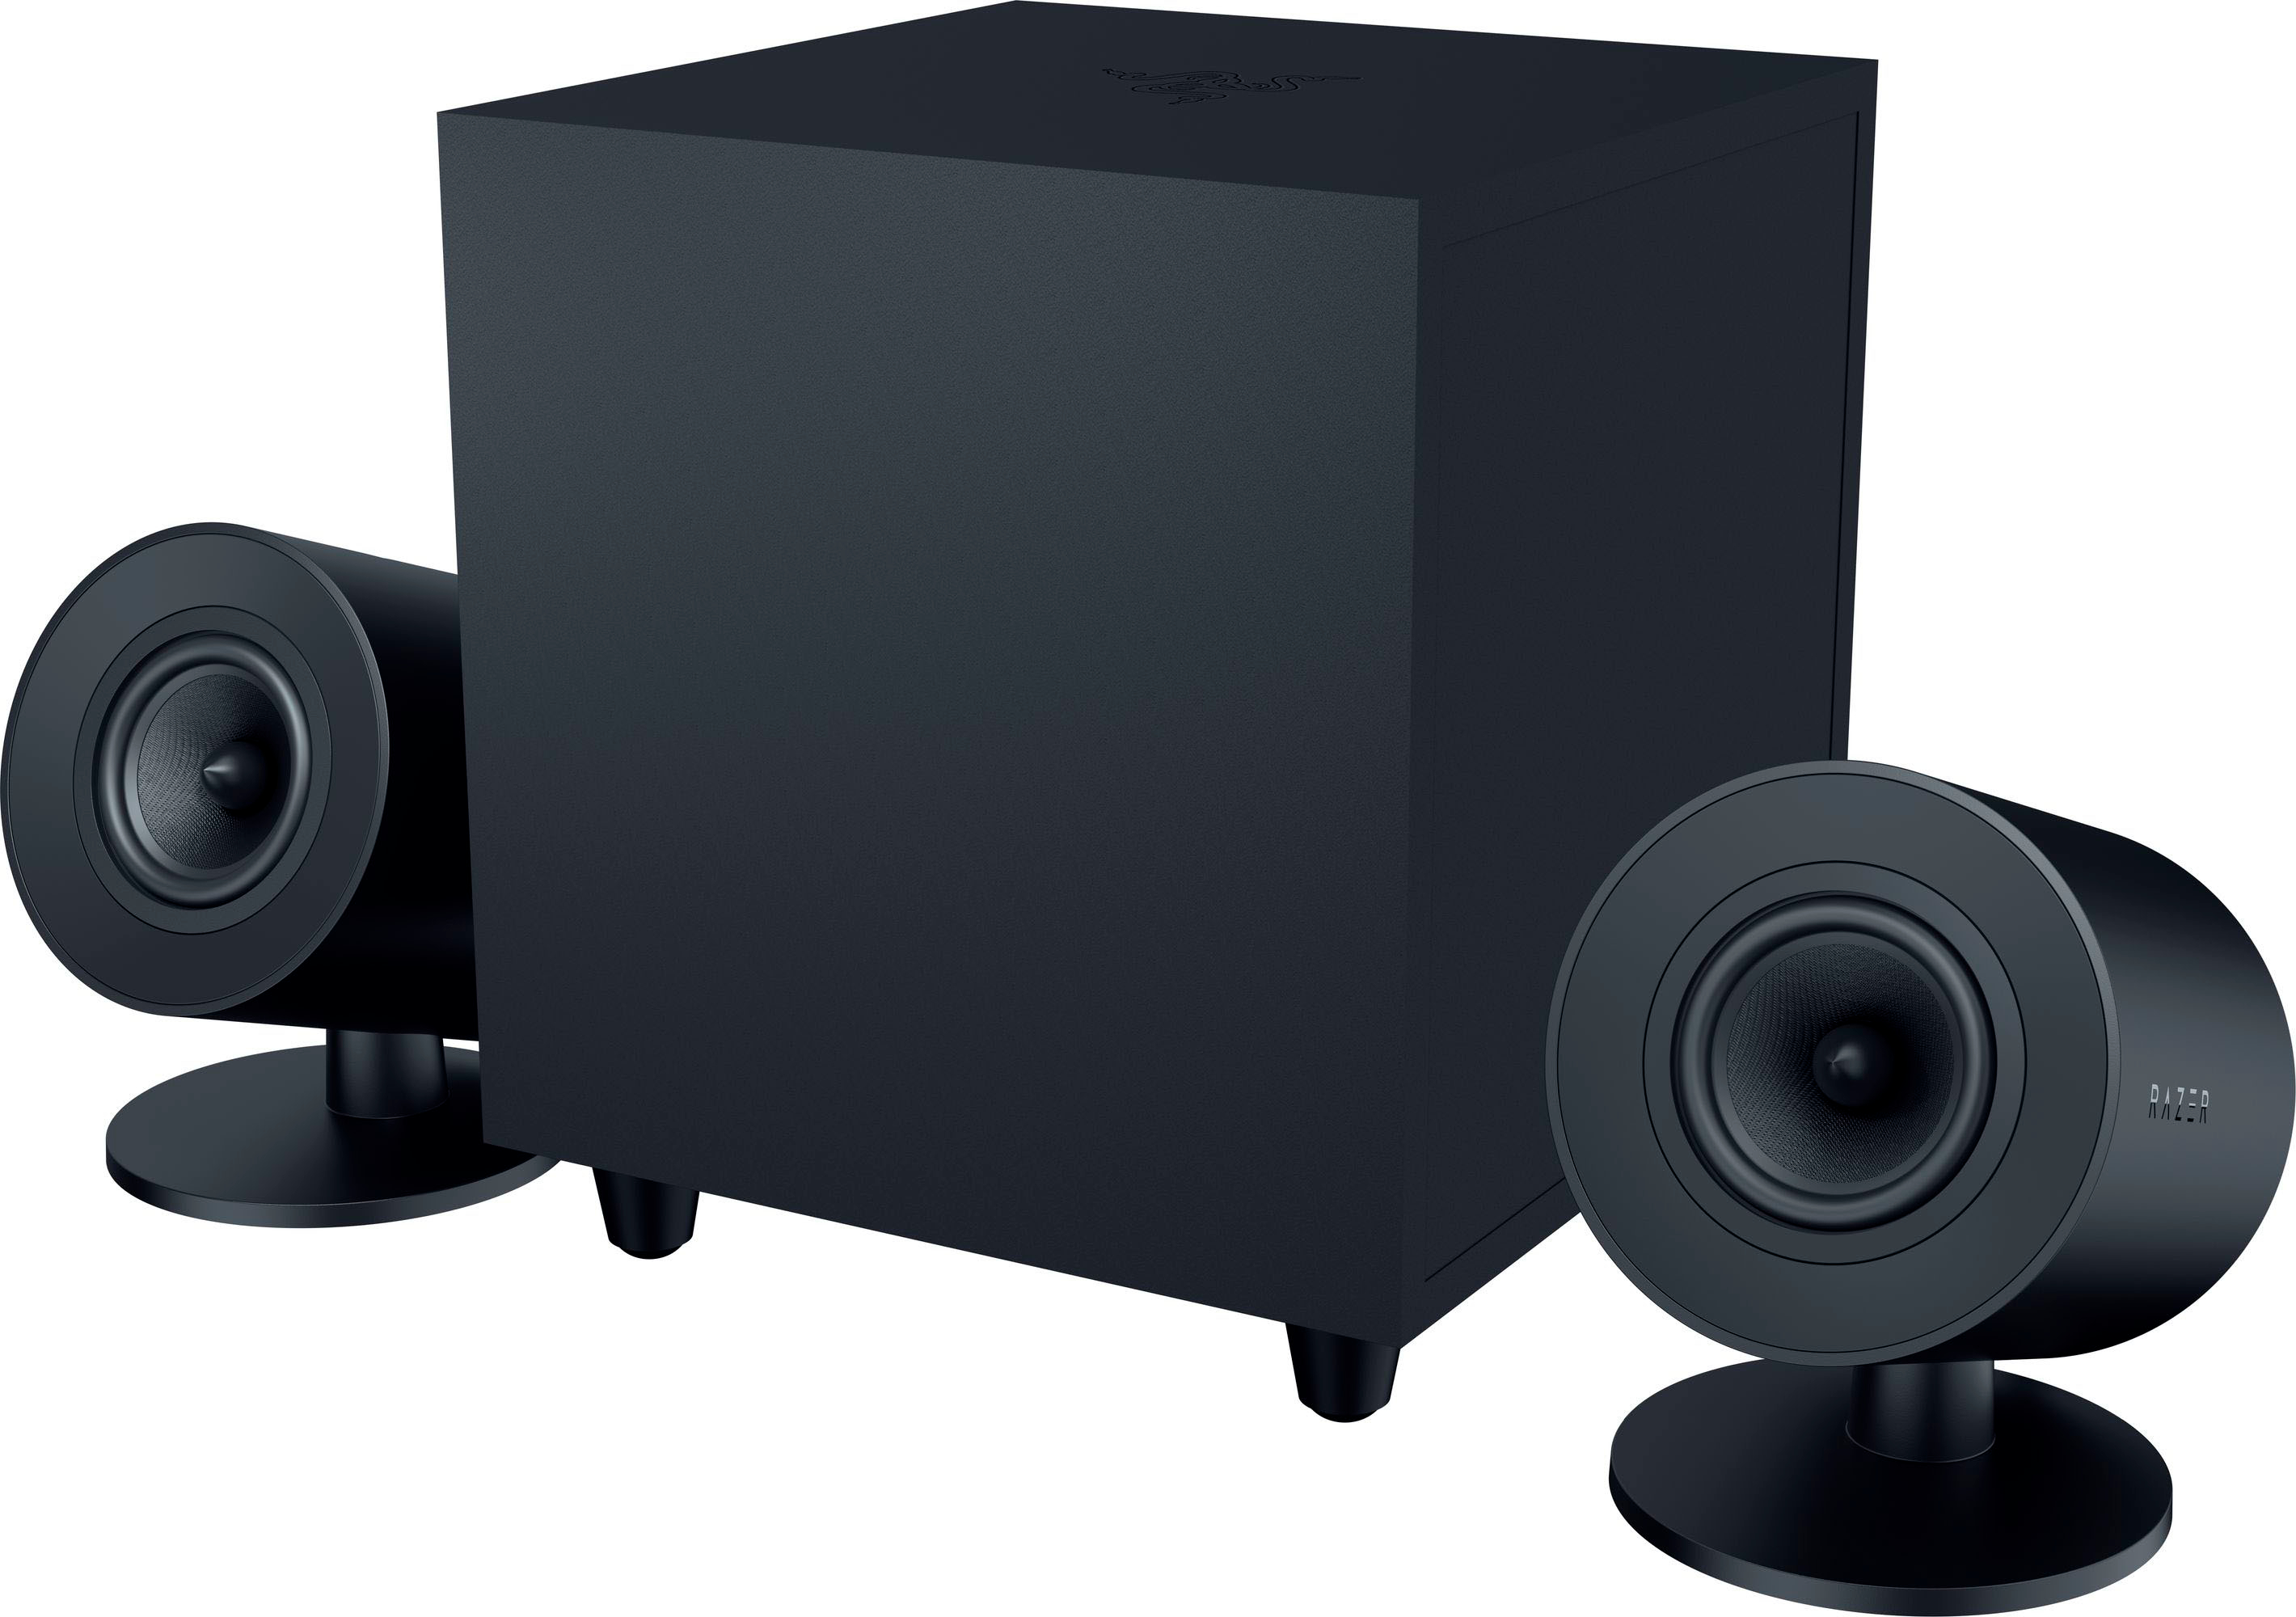 Angle View: Razer - Nommo V2 Full-Range 2.1 PC Gaming Speakers with Wired Subwoofer (3 Piece) - Black